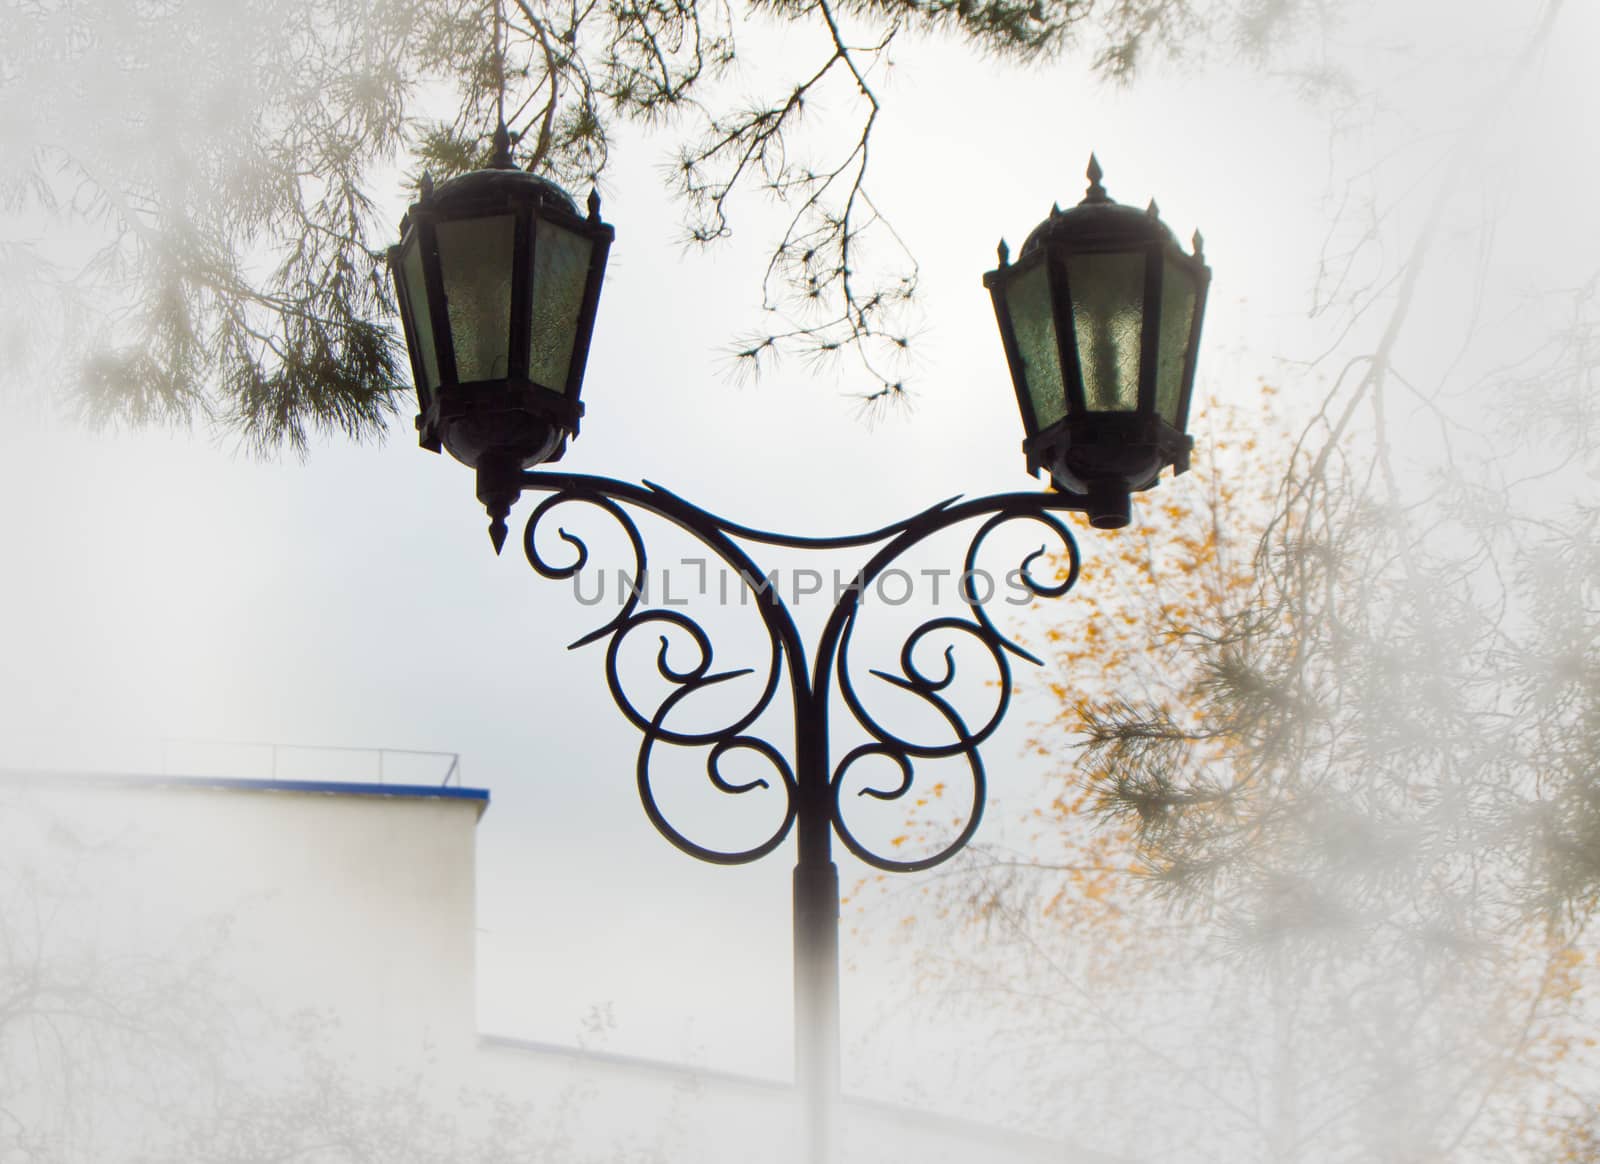 Beautiful street lamp against the sky and trees, added vignette light edges for clouds and haze.